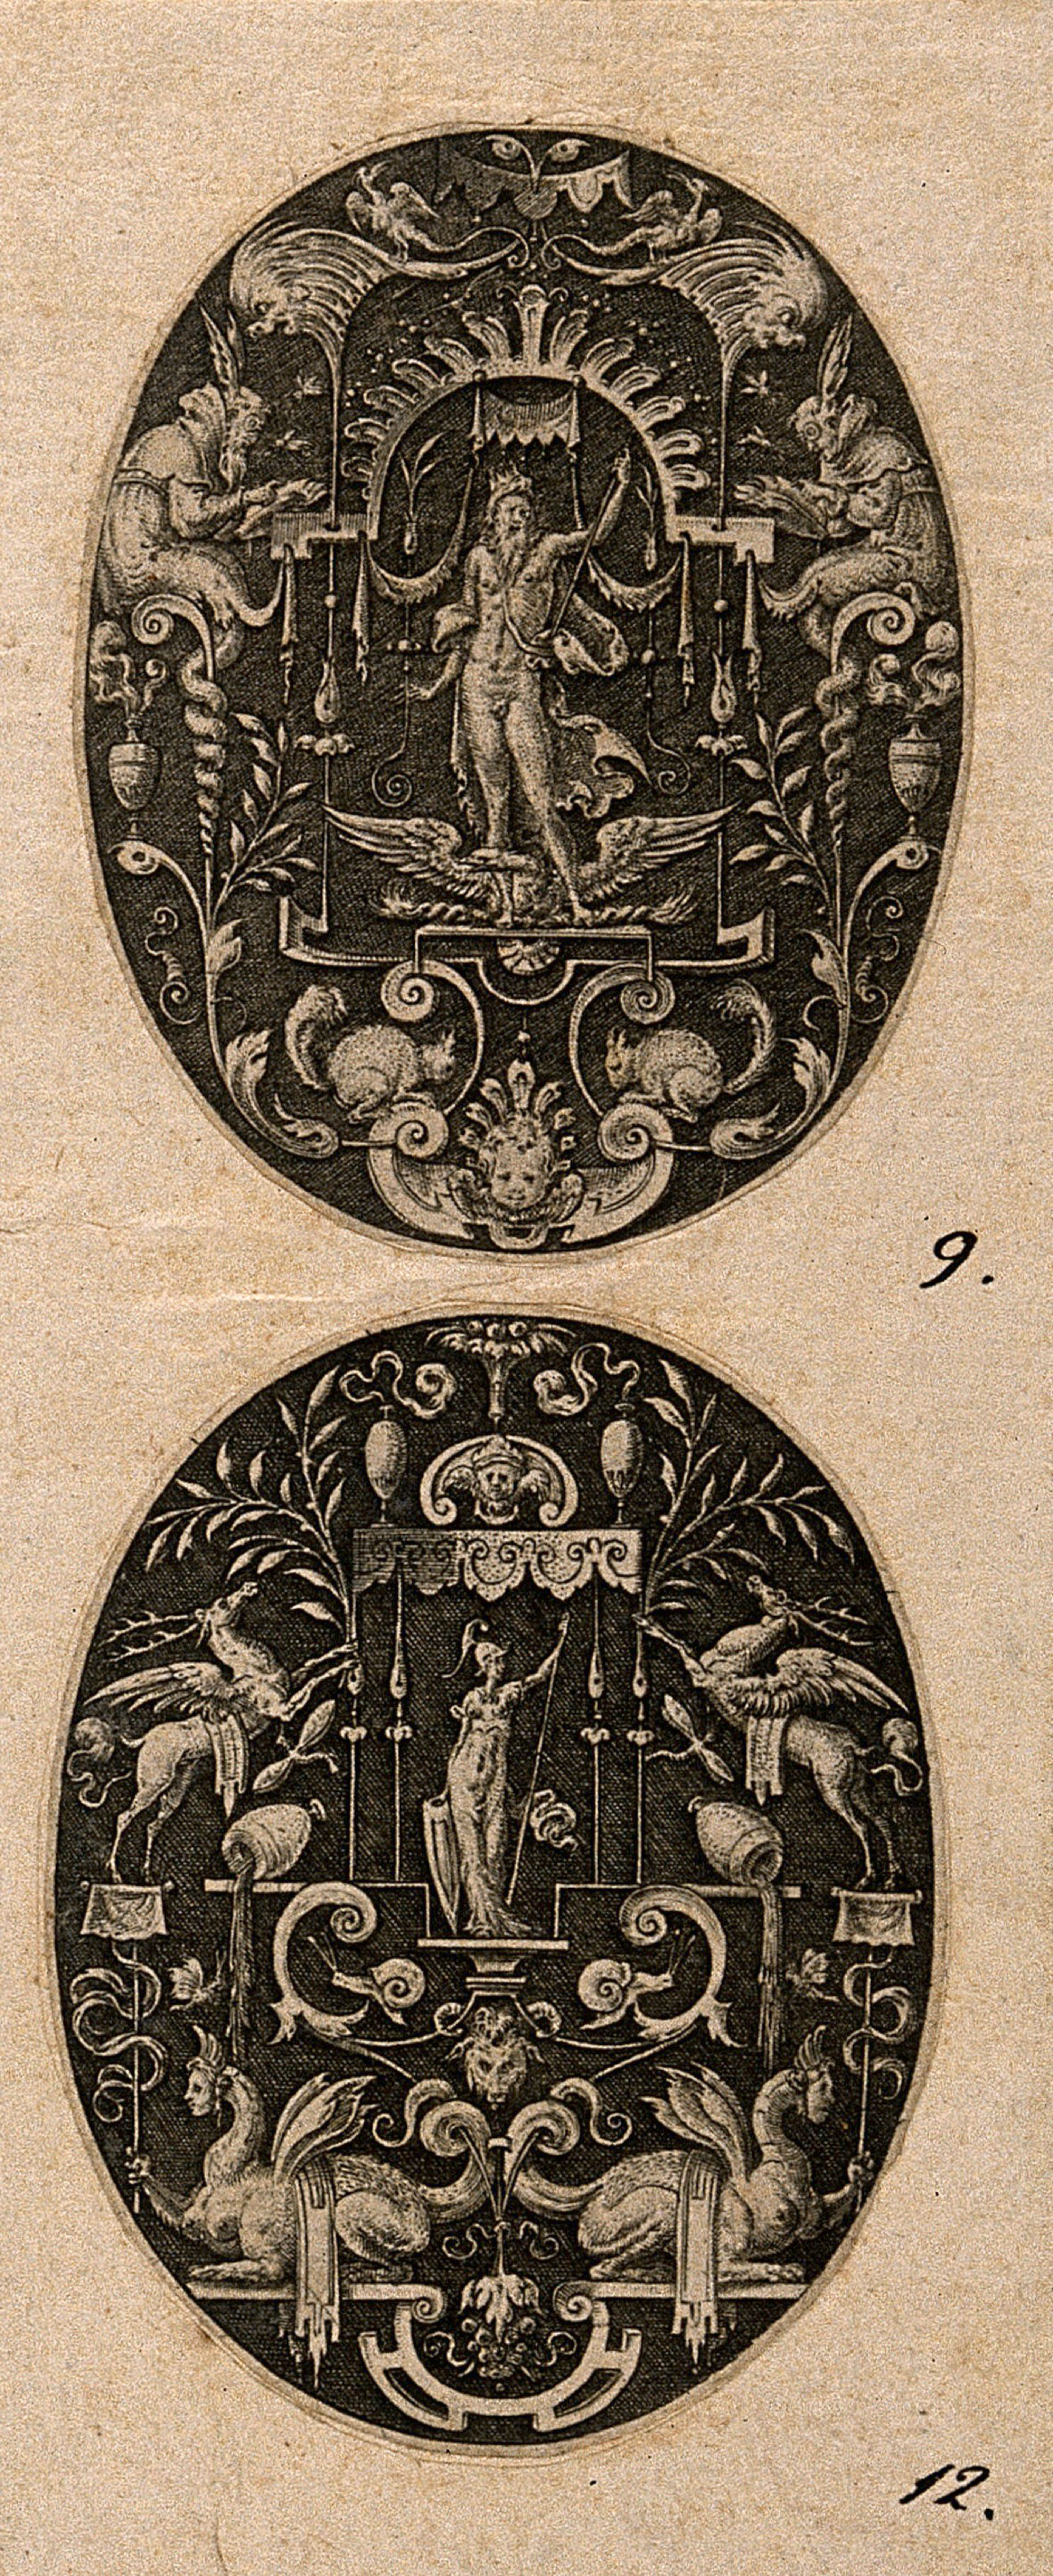 The god Jupiter flanked by two scholars with winged heads and glasses. Engraving by E. Delaune, ca. 1560.